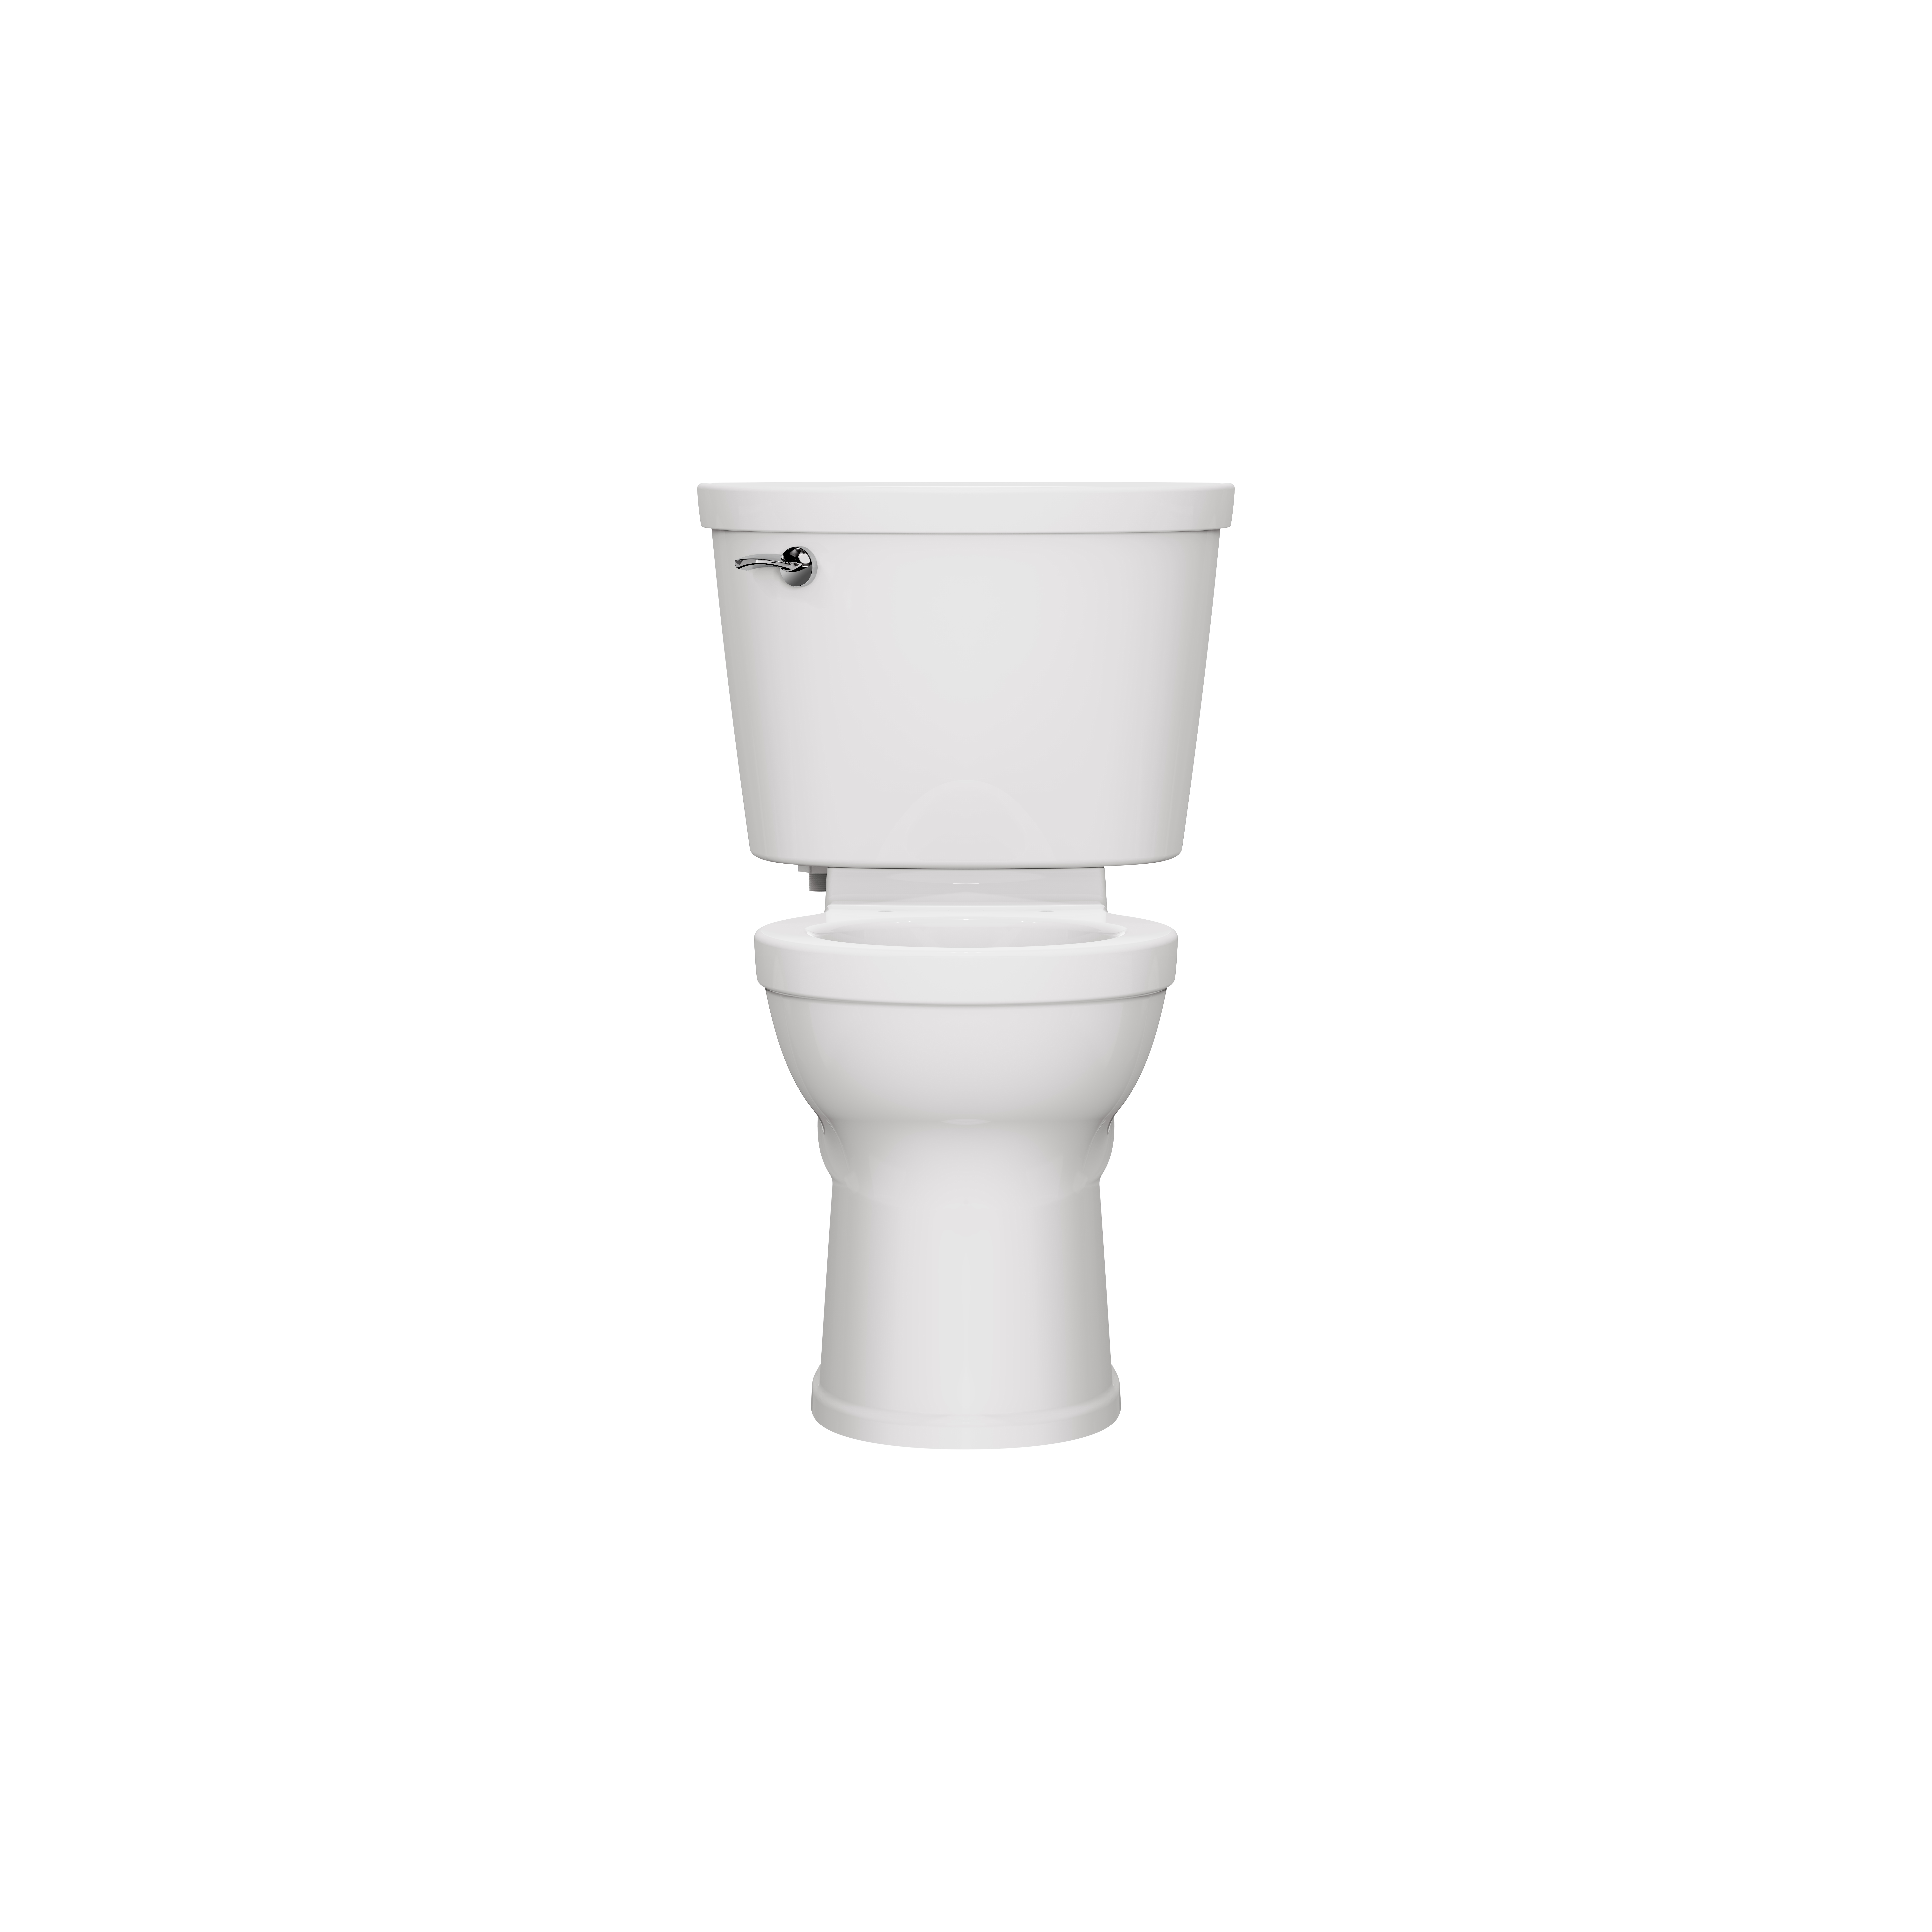 Champion® PRO Two-Piece 1.28 gpf/4.8 Lpf Chair Height Round Front Toilet Less Seat